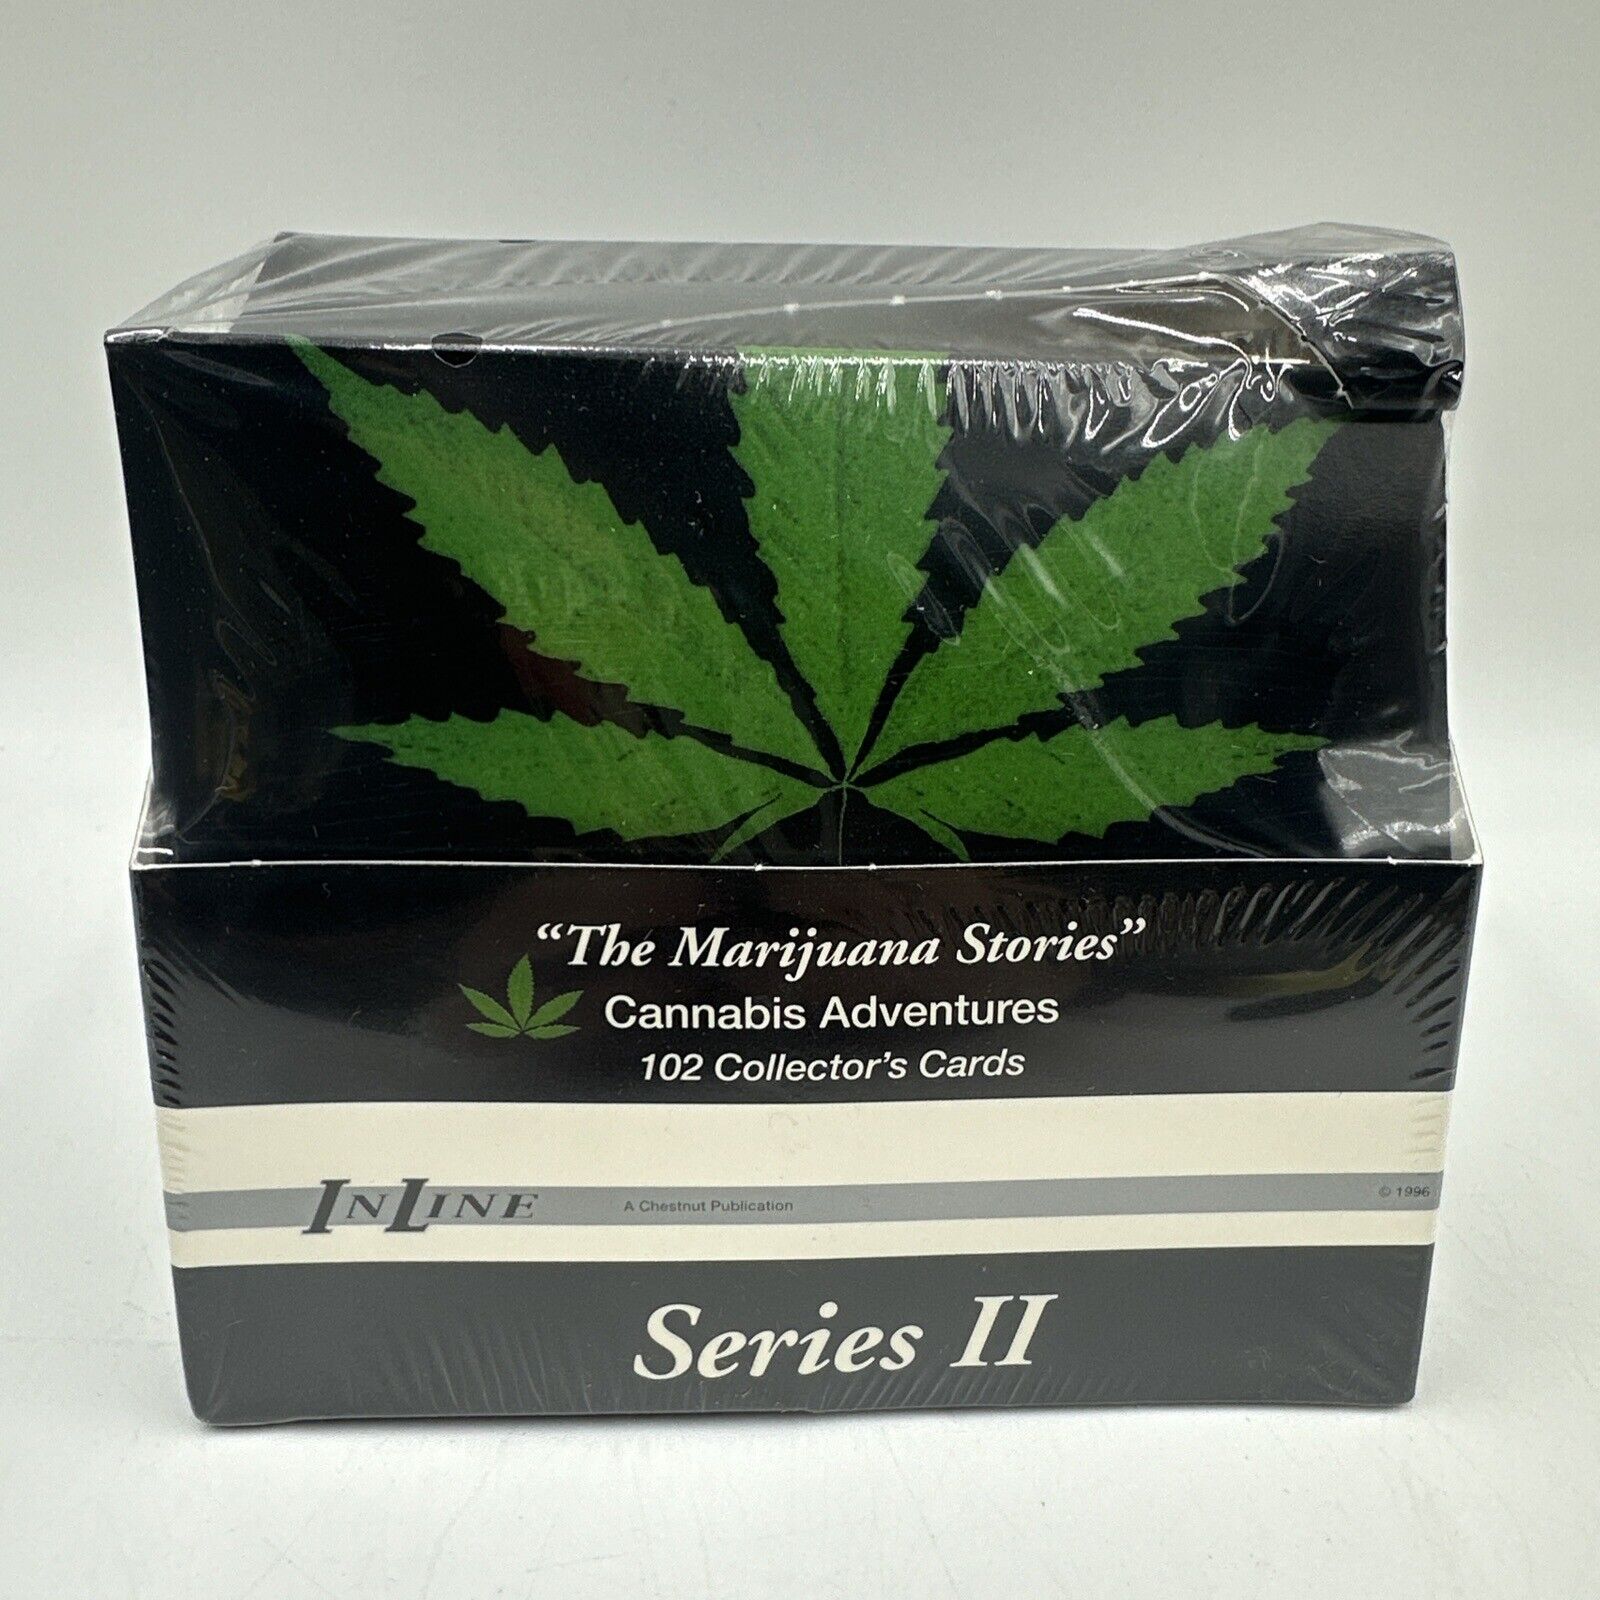 [RARE]  Sealed 1996 “In Line” Cannabis Collector Cards (Series II)